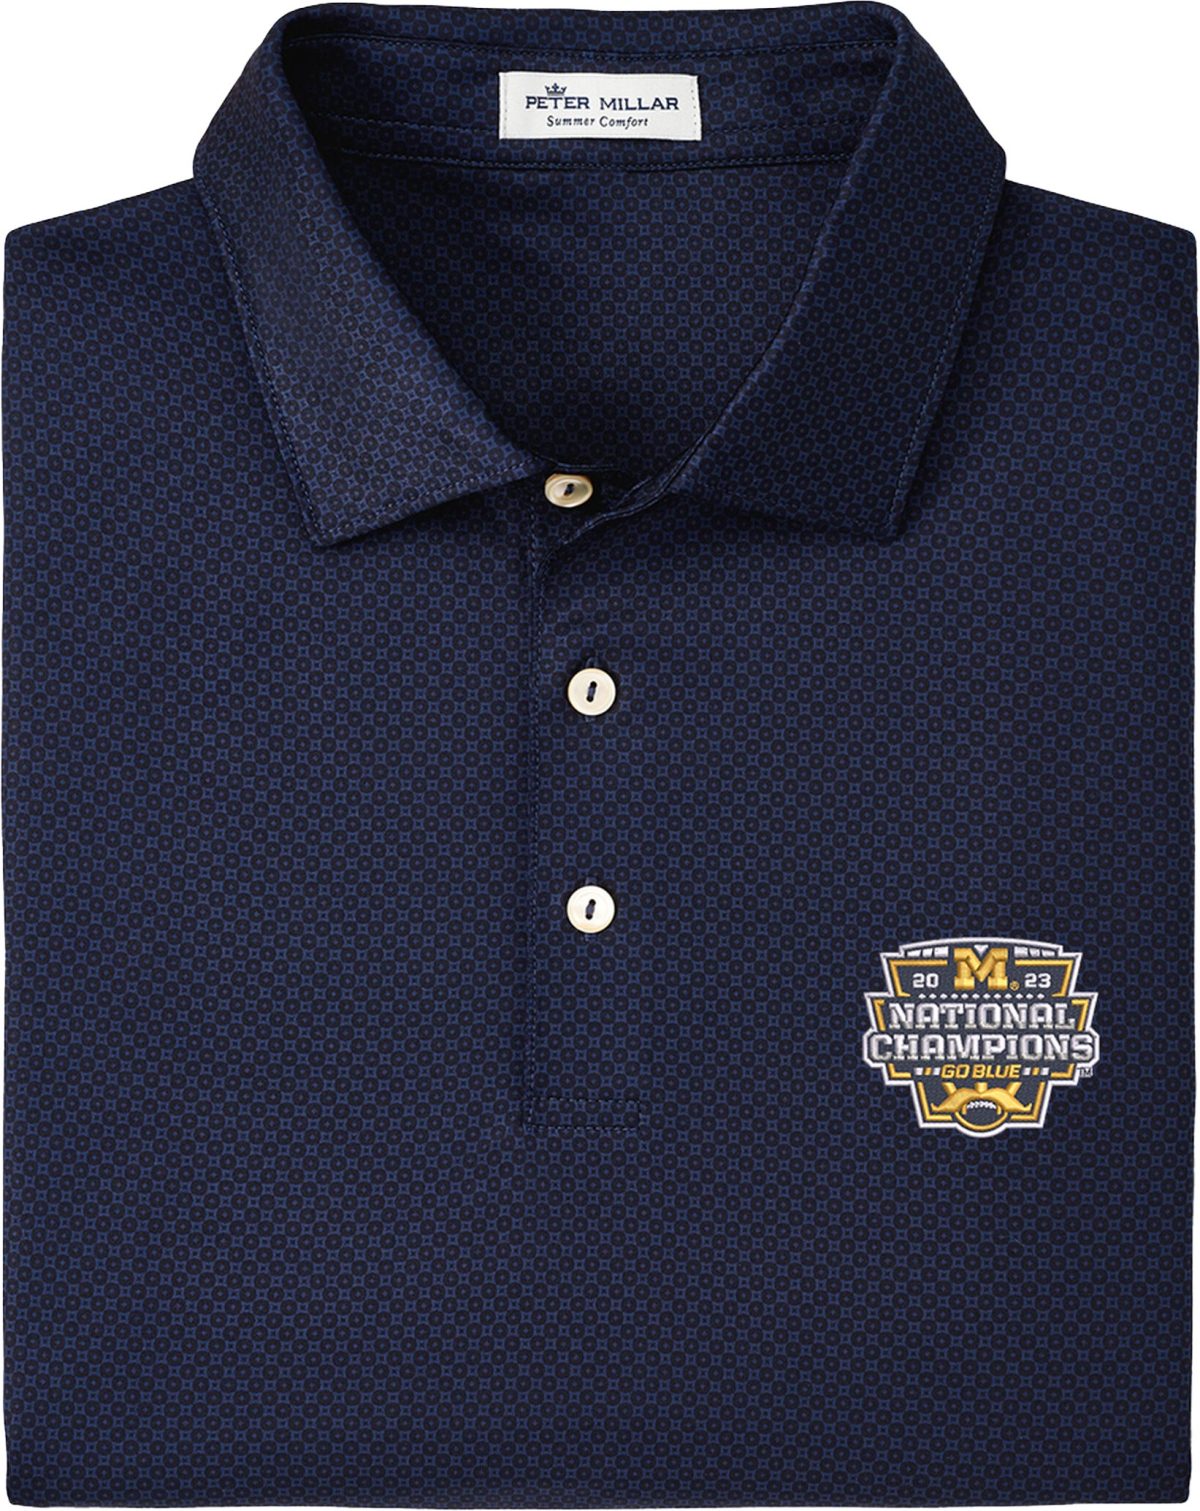 Peter Millar Men's University Of Michigan National Champion Dolly Performance Jersey Golf Polo, Spandex/Polyester in Navy, Size